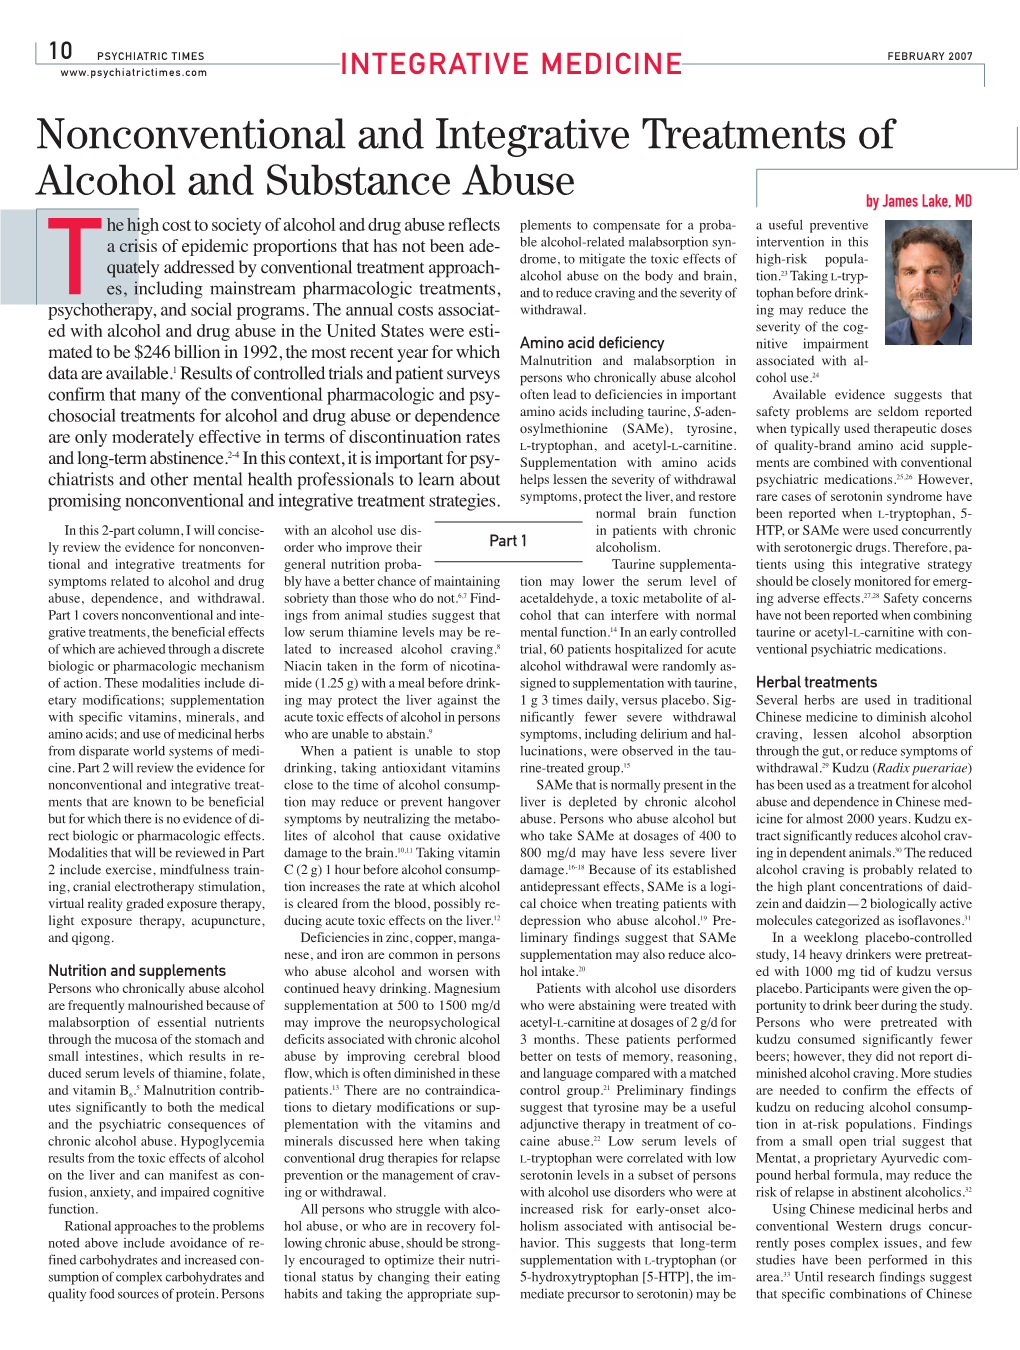 Nonconventional and Integrative Treatments of Alcohol